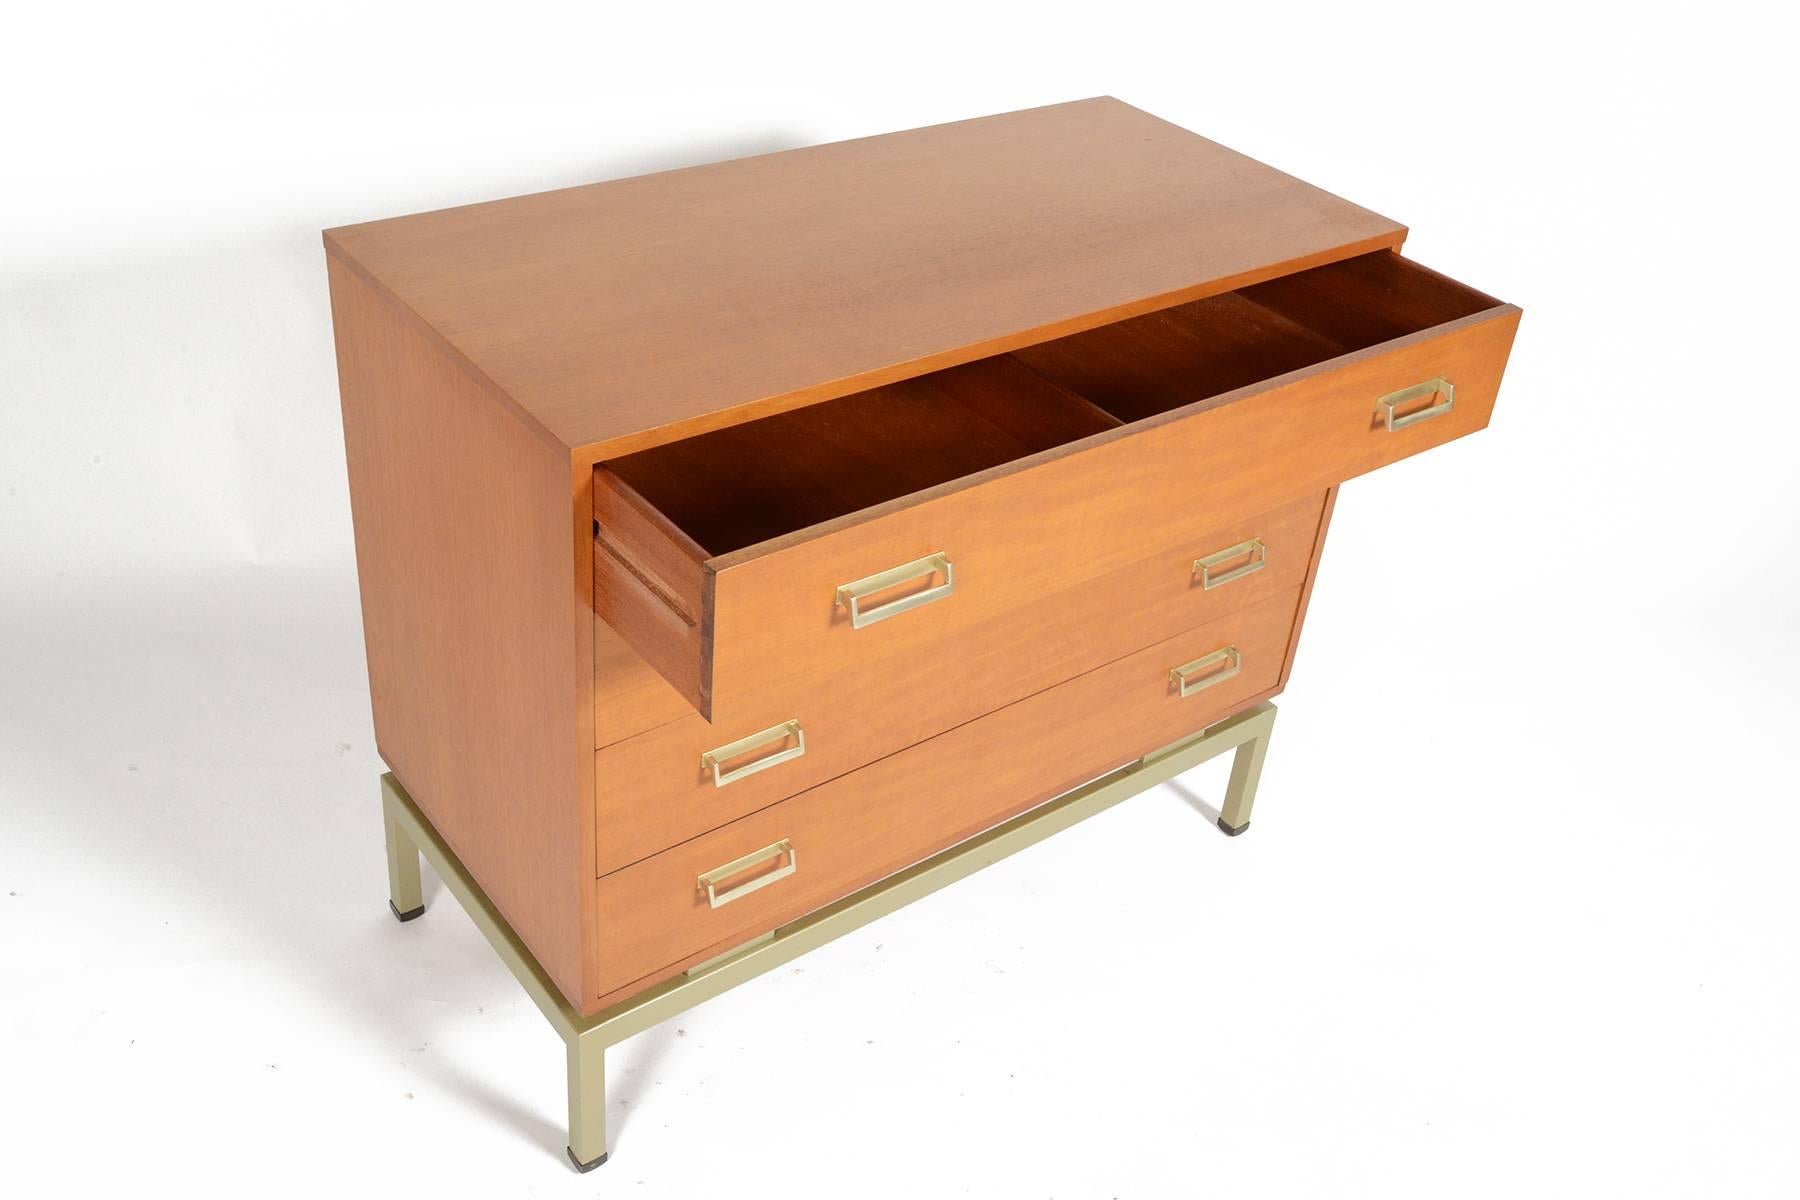 This modern mid century teak gentleman's chest was manufactured by G Plan and offers four nicely sized drawers. Each drawer front features two aluminum pulls. The case is supported by a structural aluminum base. In excellent original condition with